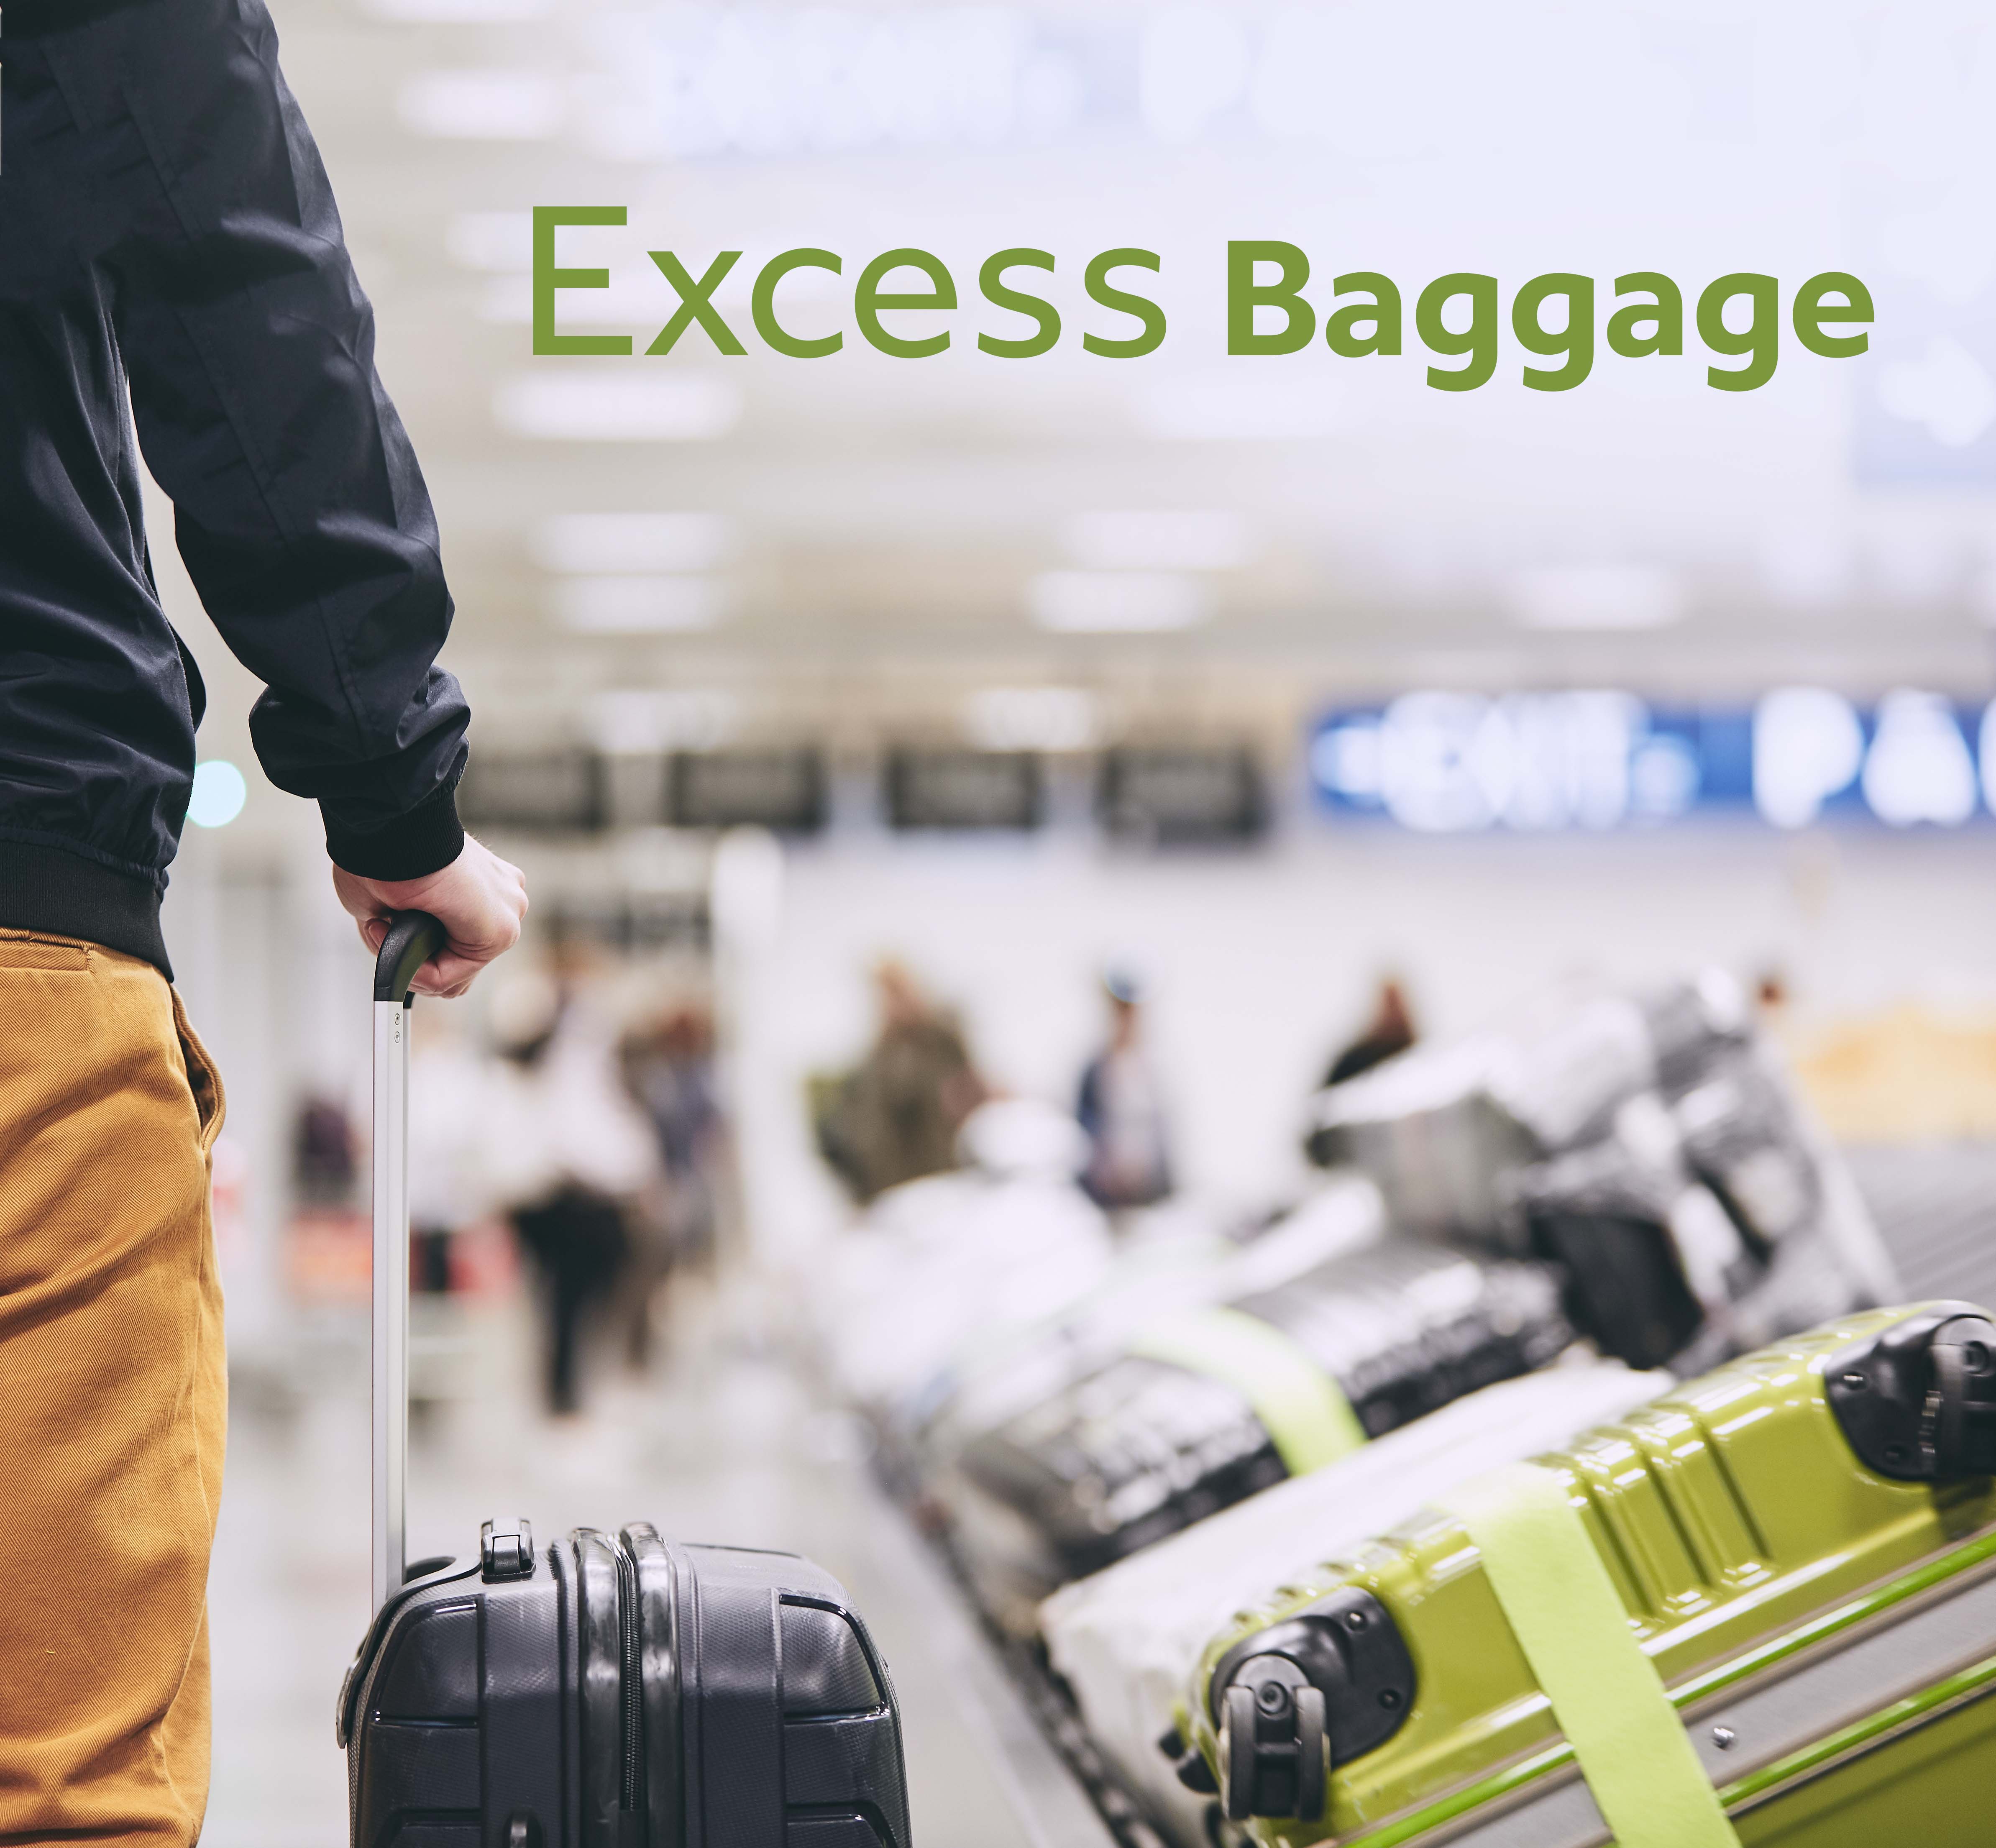 Air Mauritius Free Baggage Allowance and Excess Baggage Charges - Atom  Travel